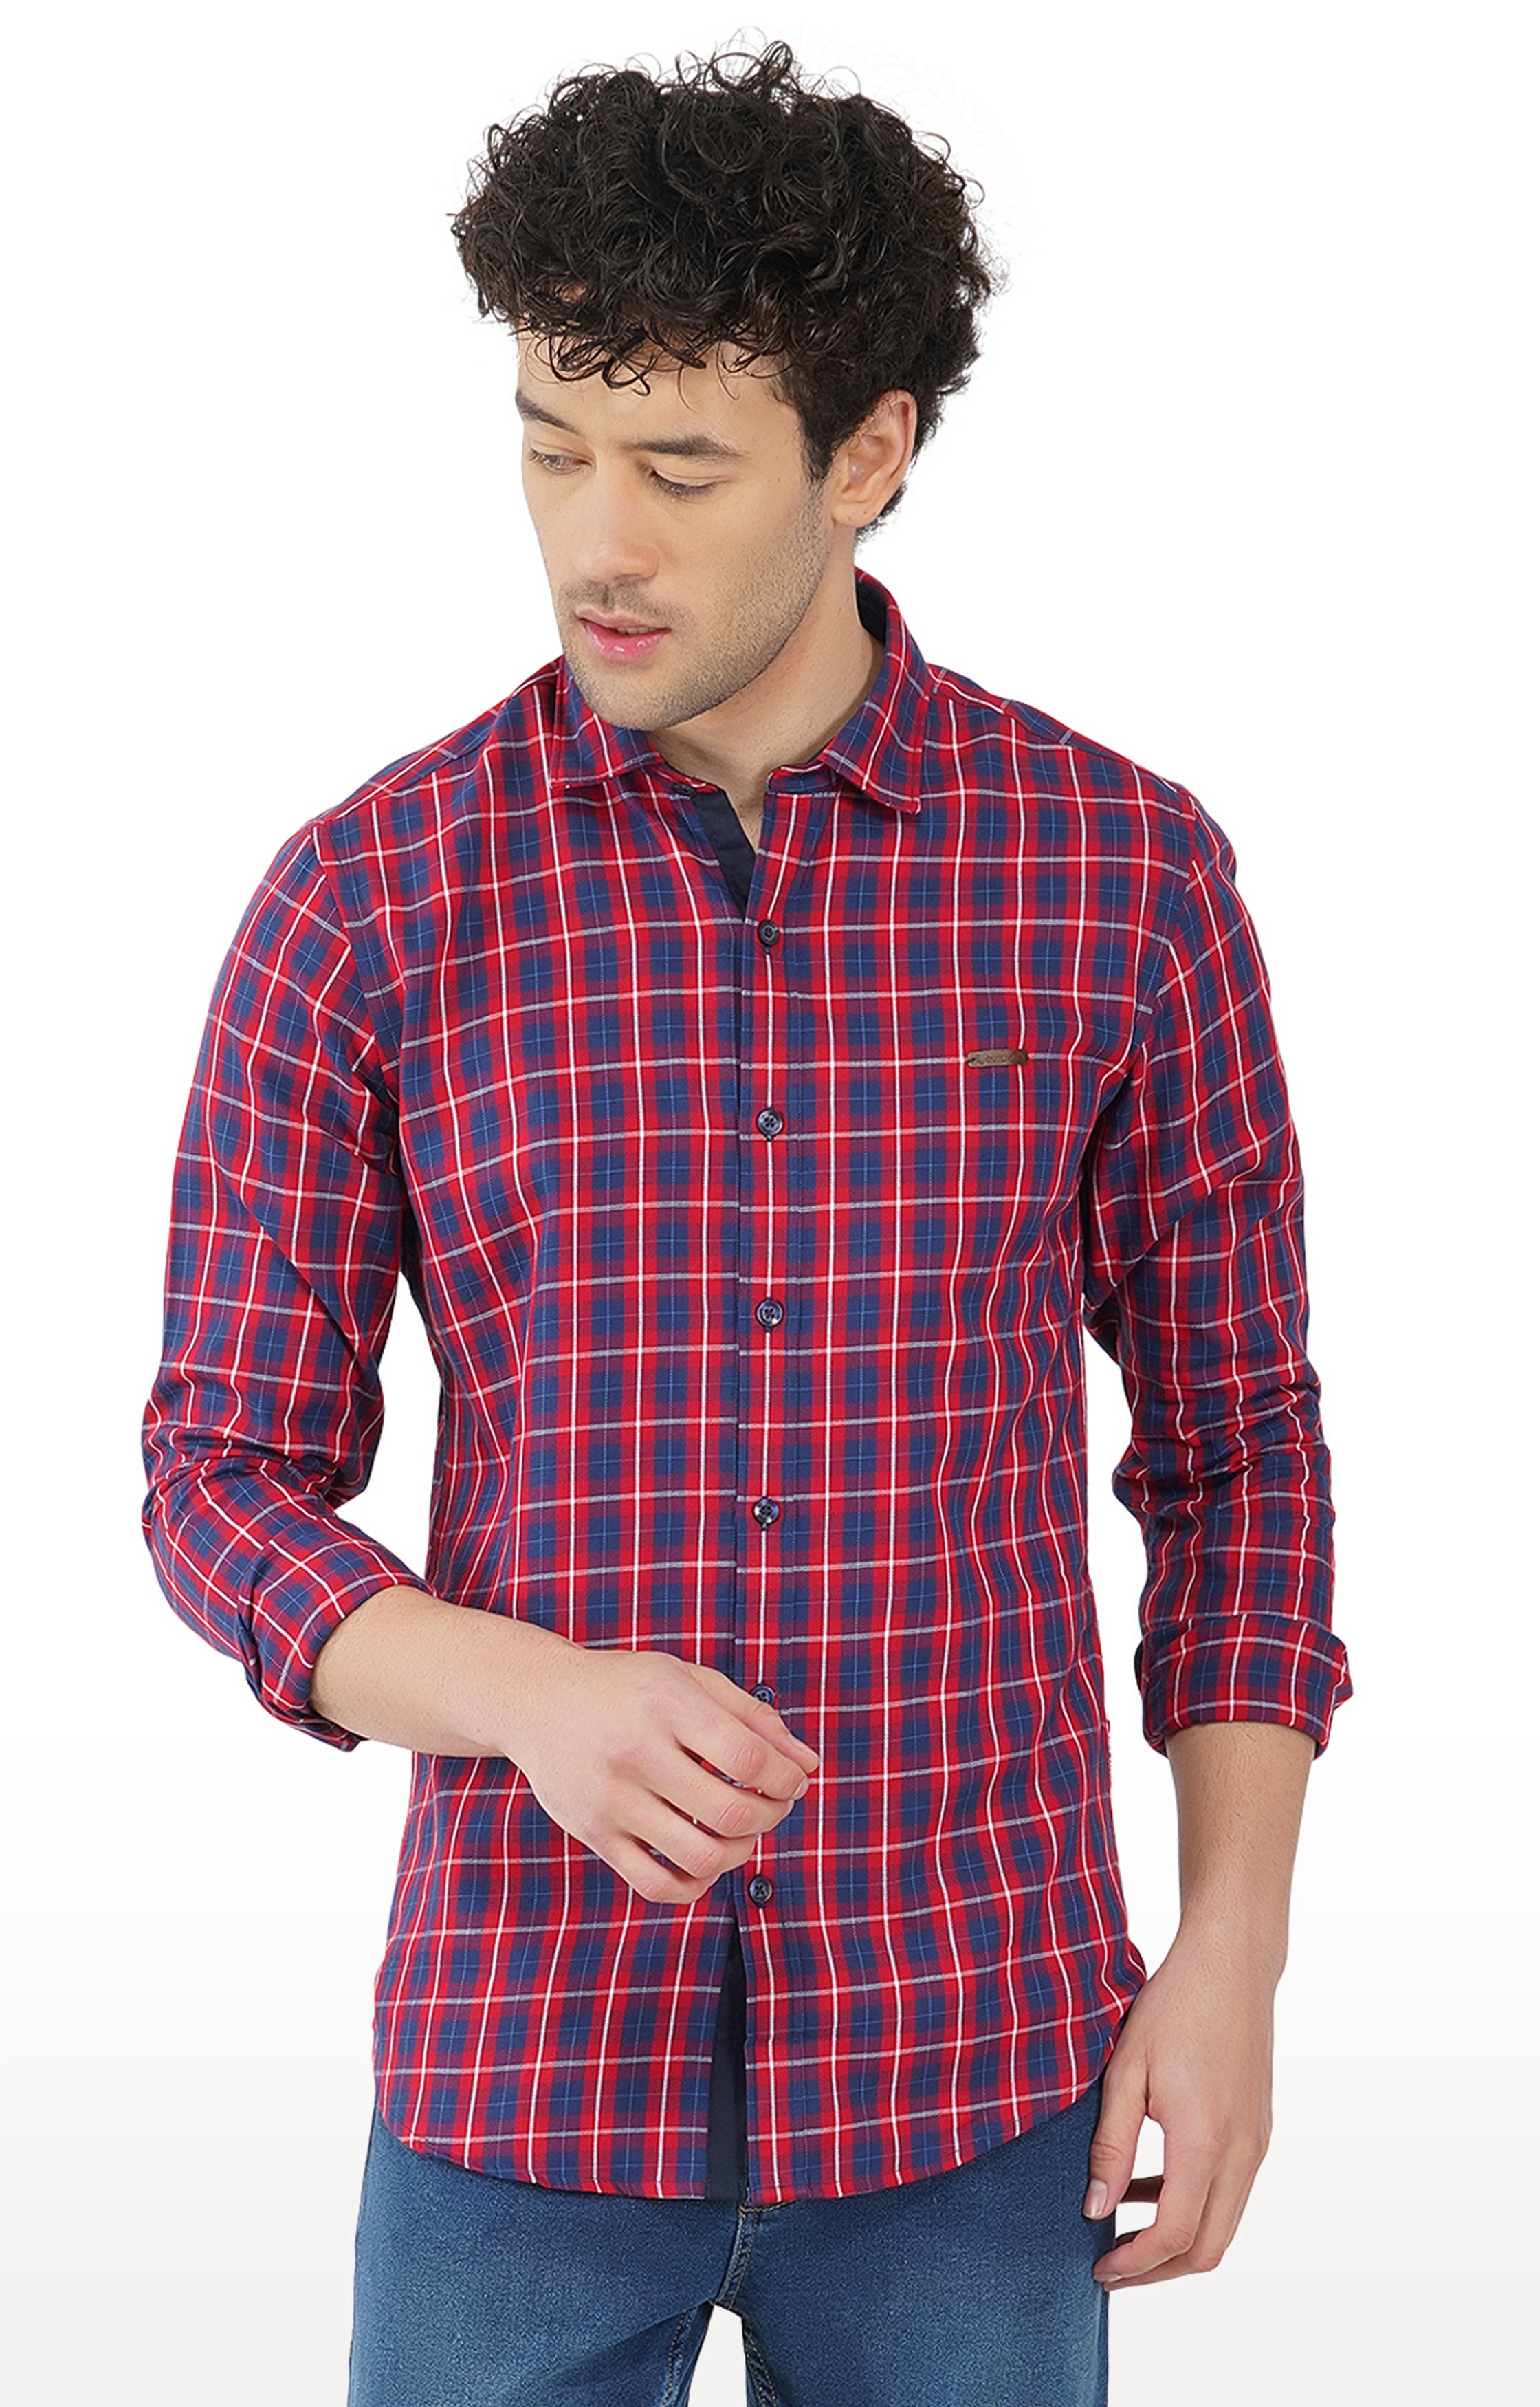 OUTLAWS | Outlaws 7040 - 100% Cotton Multi Color Check Smart Fit Shirt